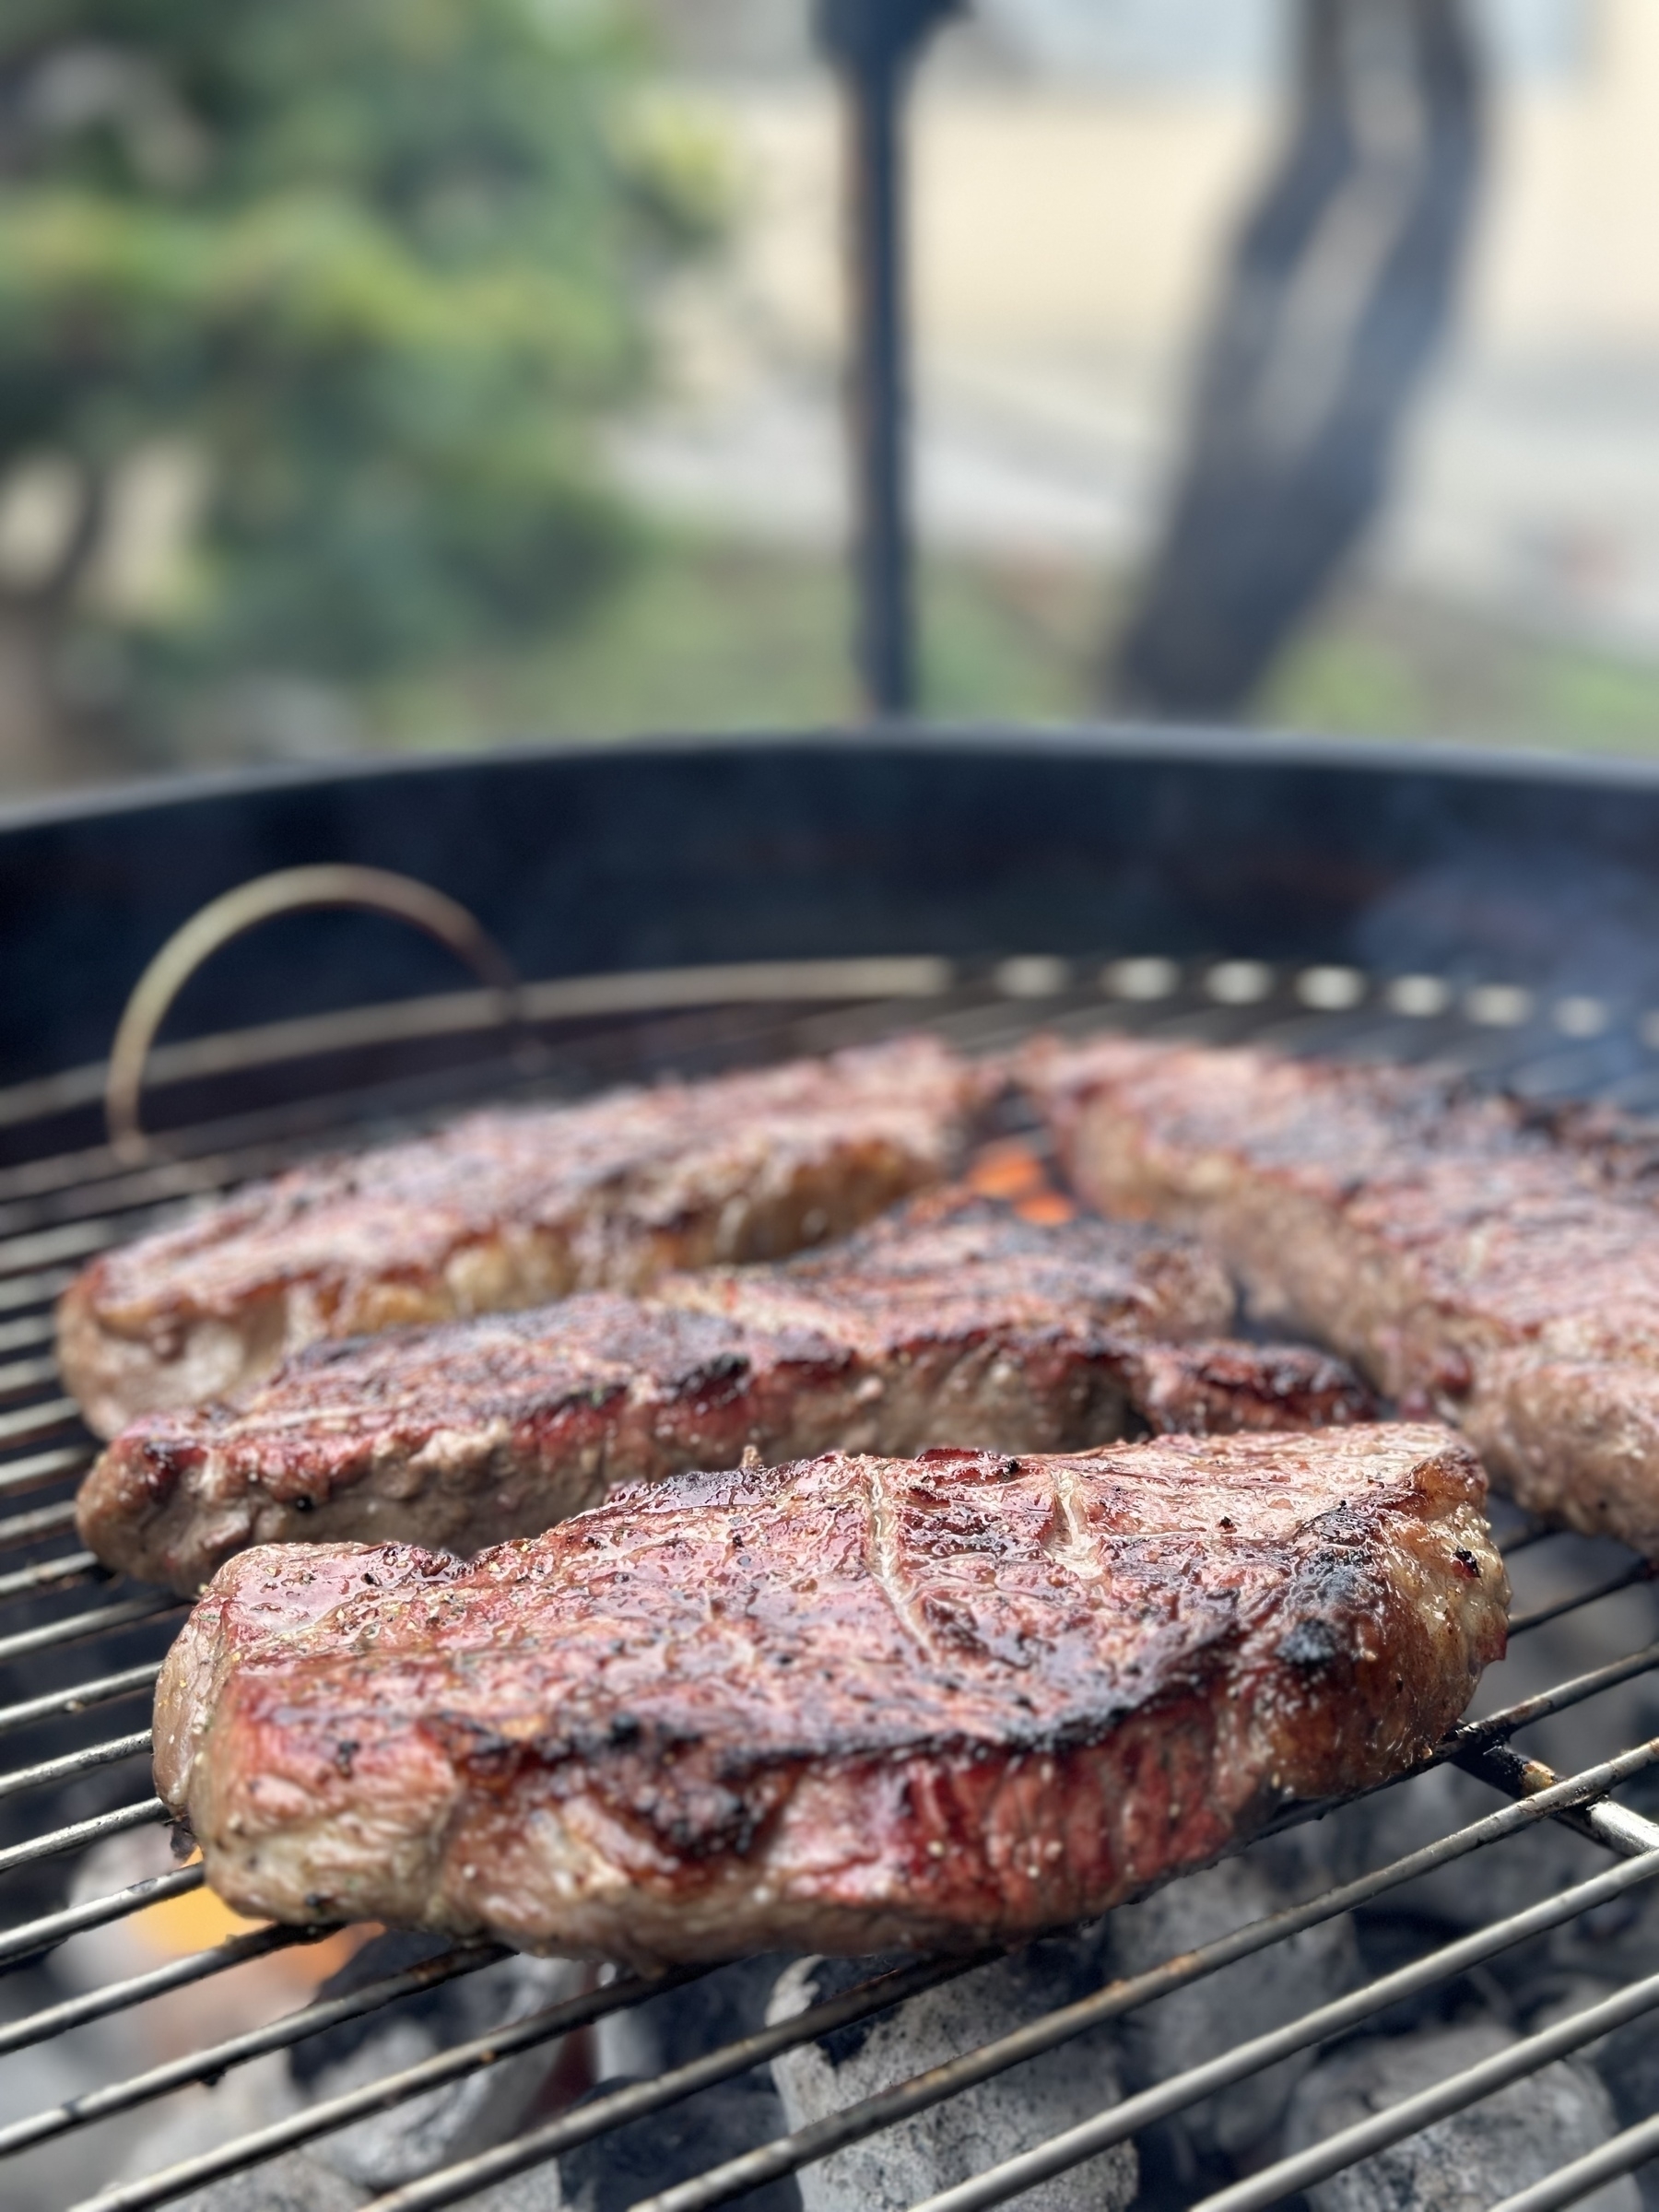 Four thick steaks being cooked on a barbecue grill, over hot charcoal. 